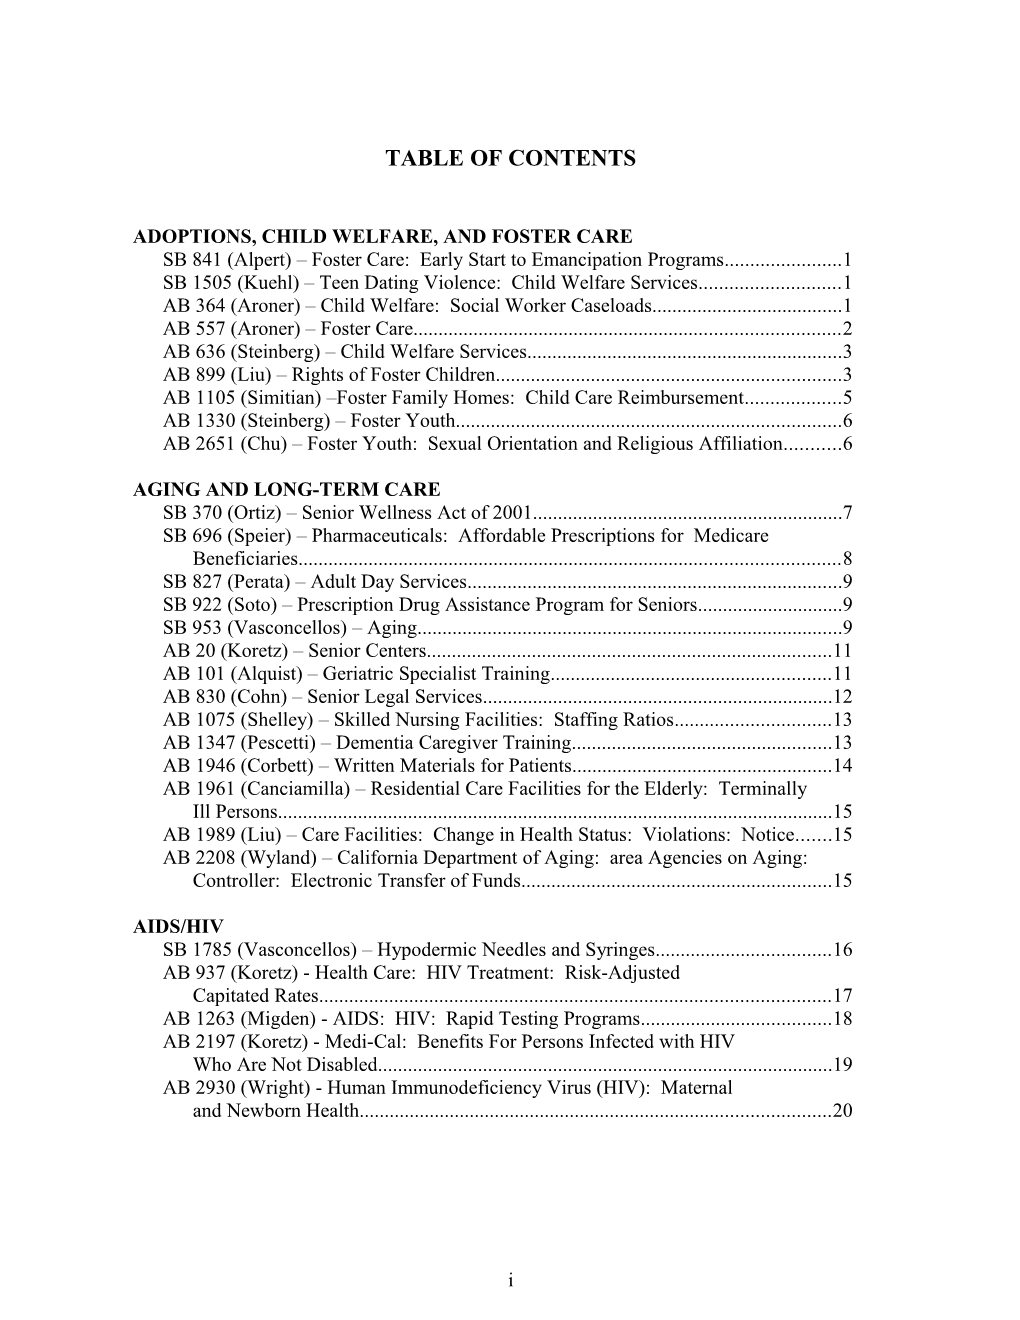 Table of Contents s436